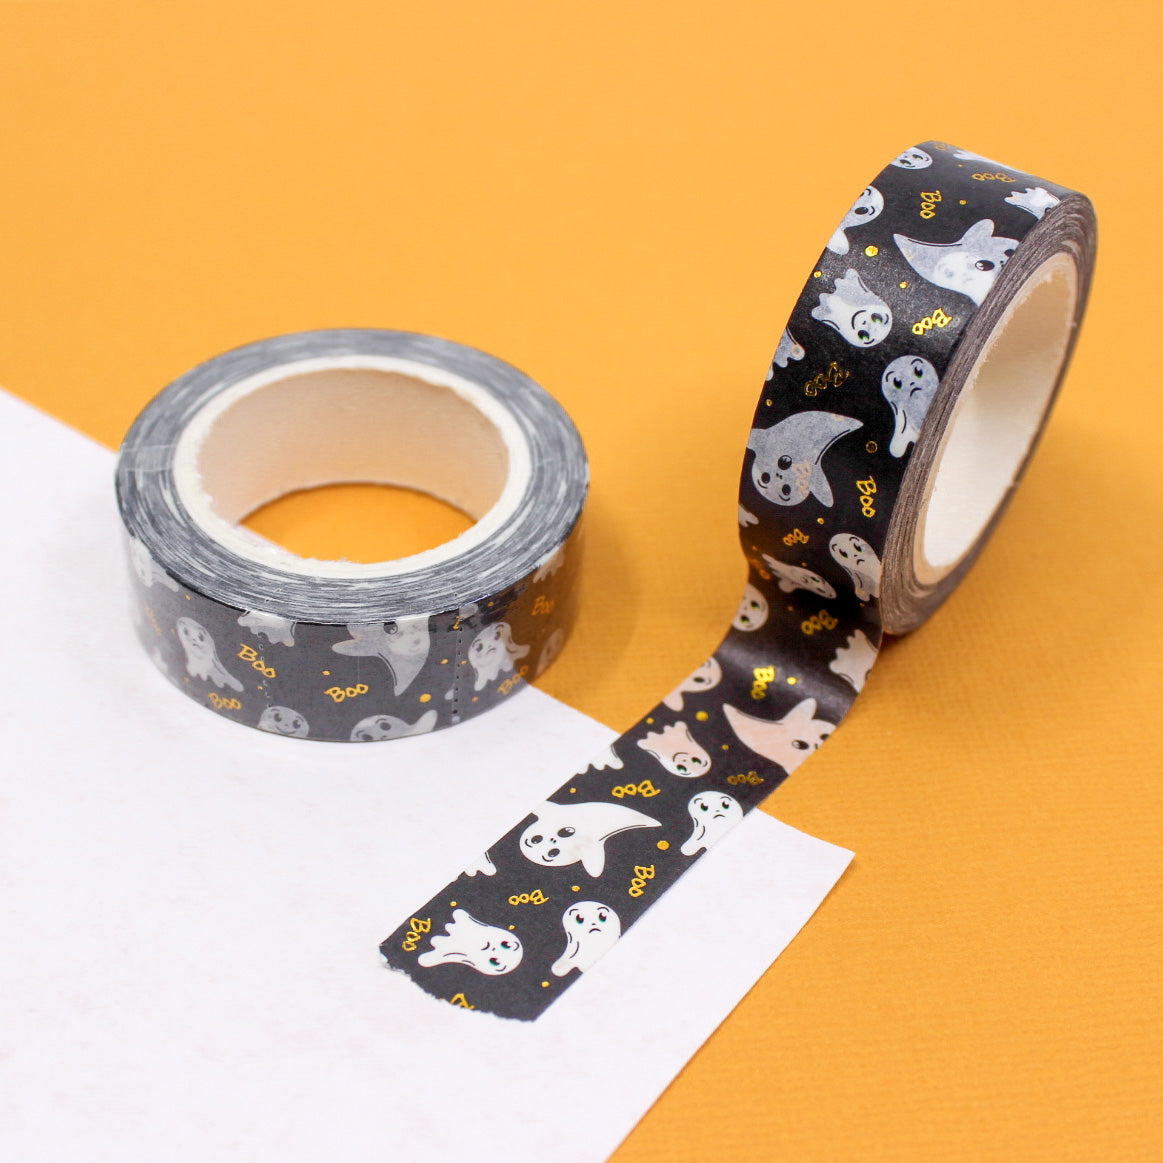 Celebrate Halloween with our Friendly Ghost Gold Foil 'Boo' Halloween Washi Tape, featuring adorable ghost and 'Boo' designs in shimmering gold foil. Ideal for adding a festive and spooky touch to your projects. This tape is sold at BBB Supplies Craft Shop.